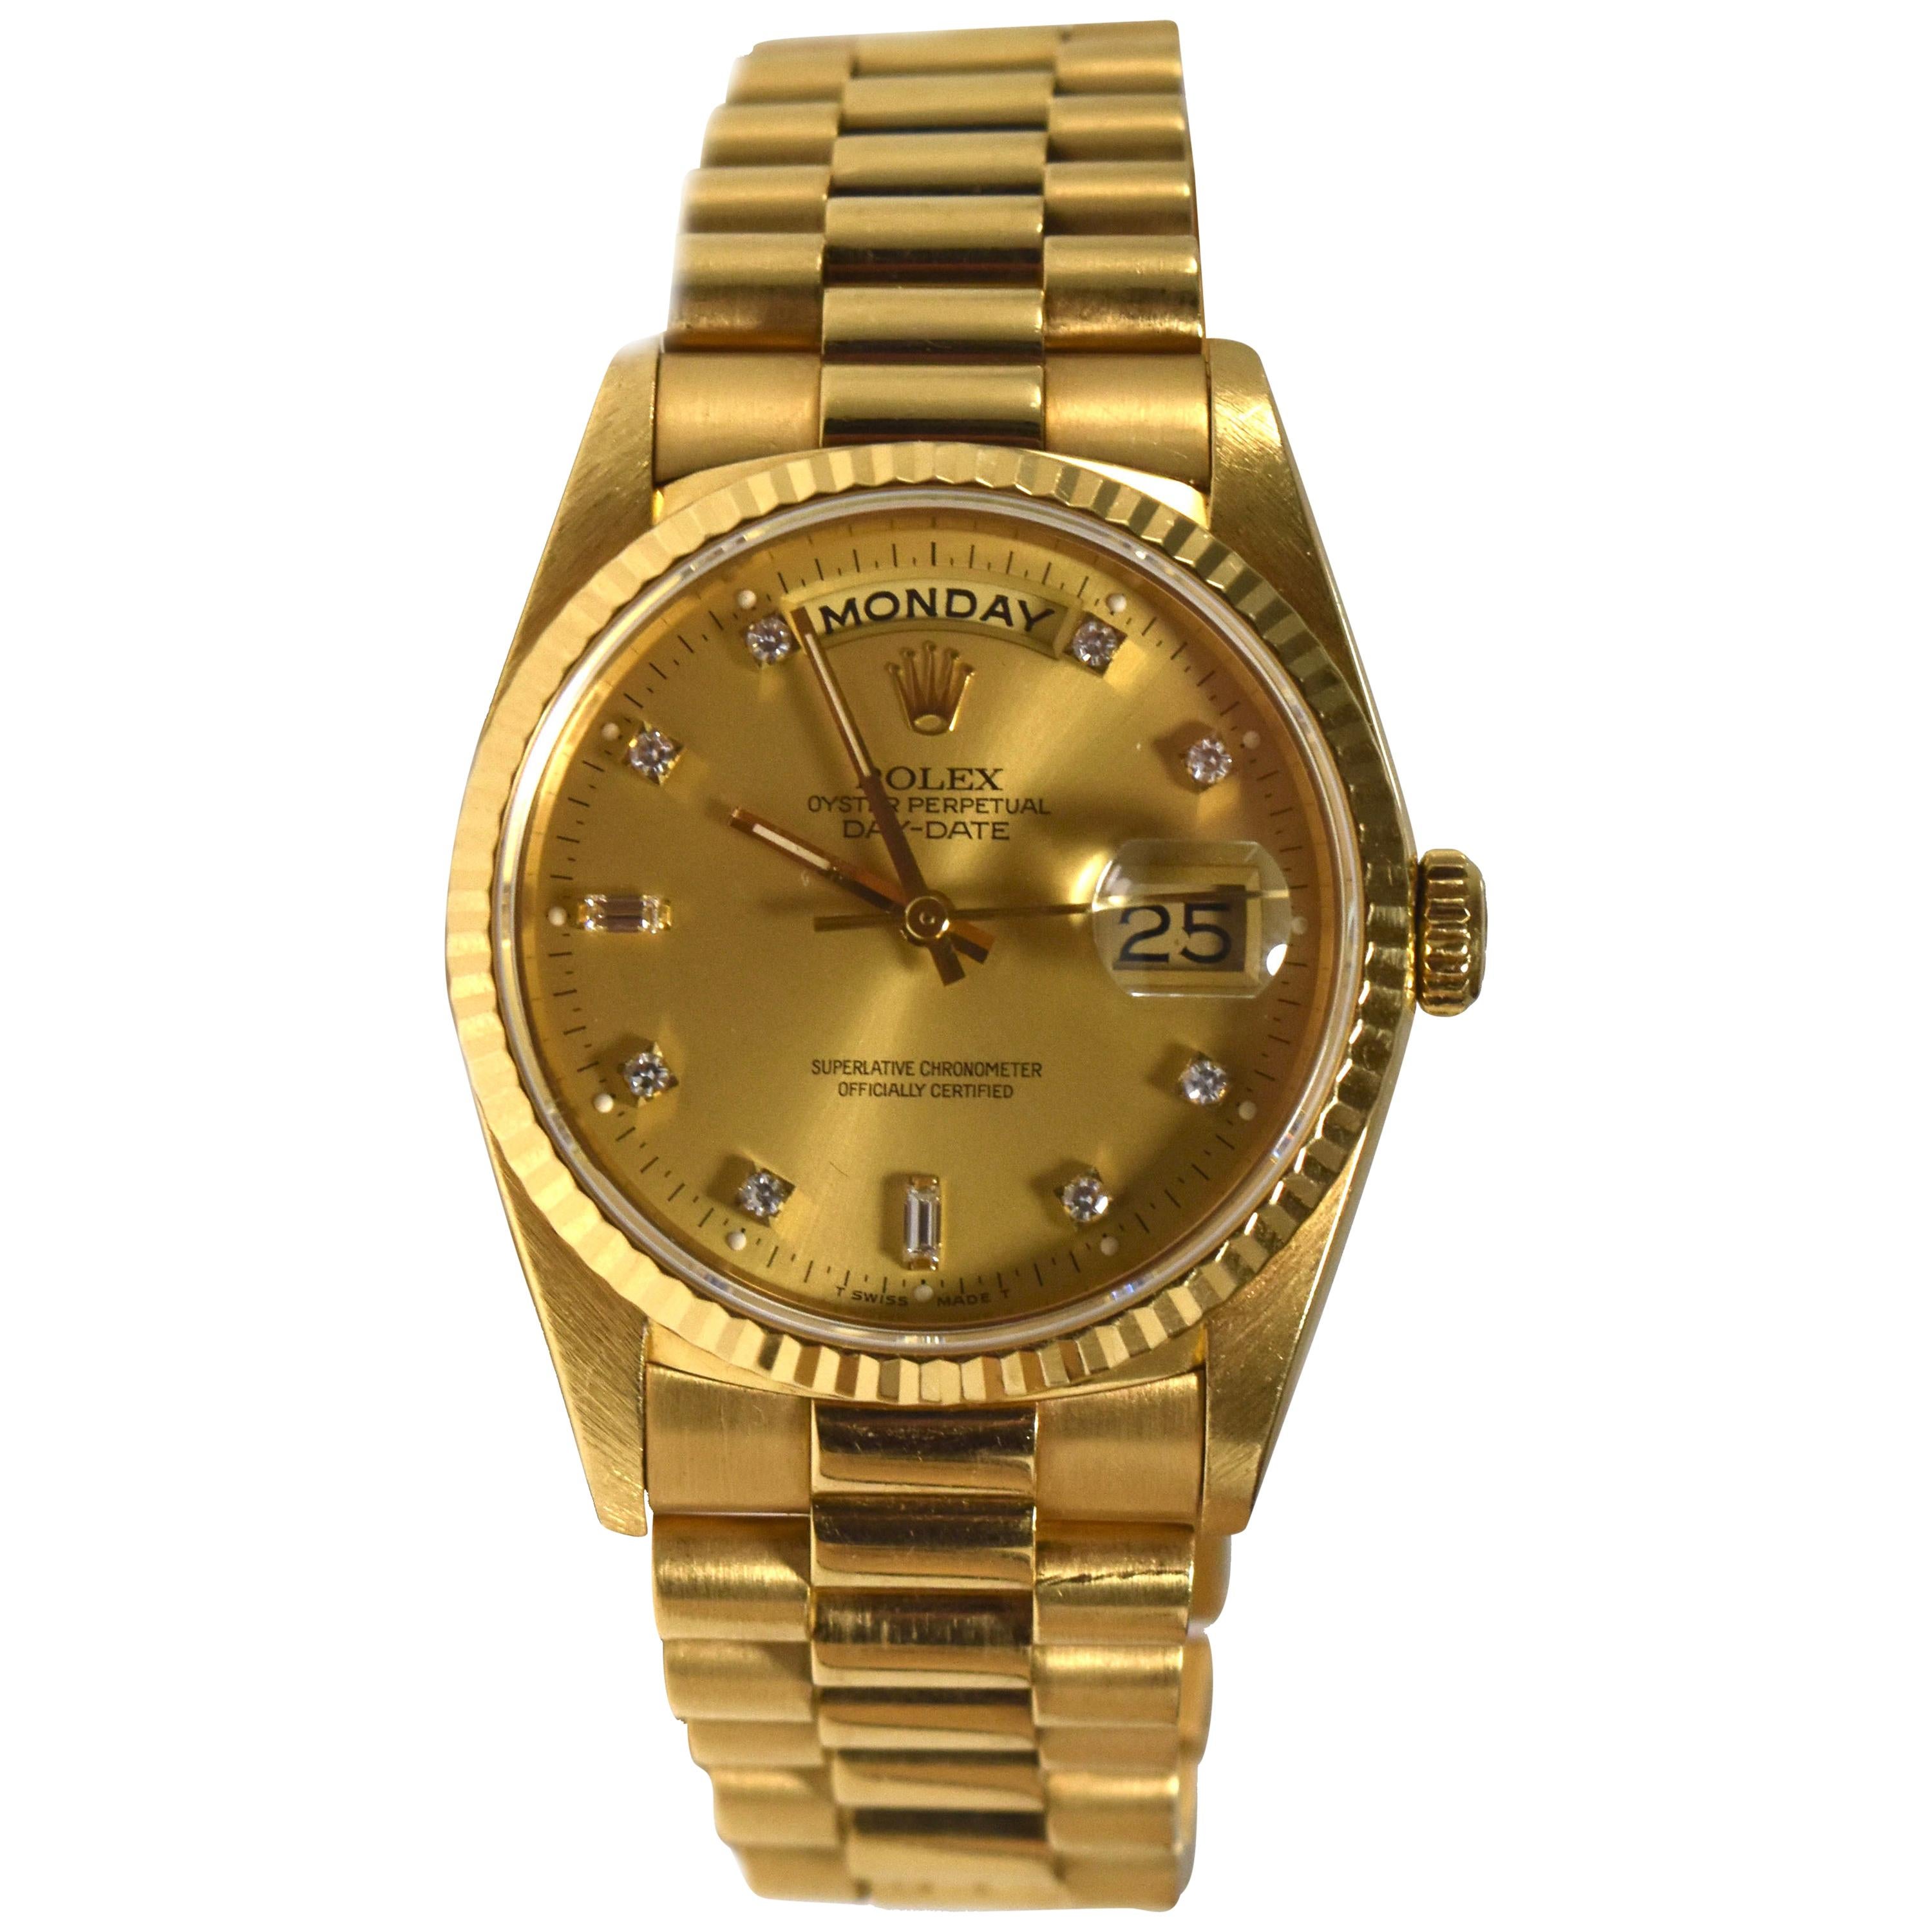 Rolex Day-Date President Yellow Gold Diamond Dial Watch Ref. 118238